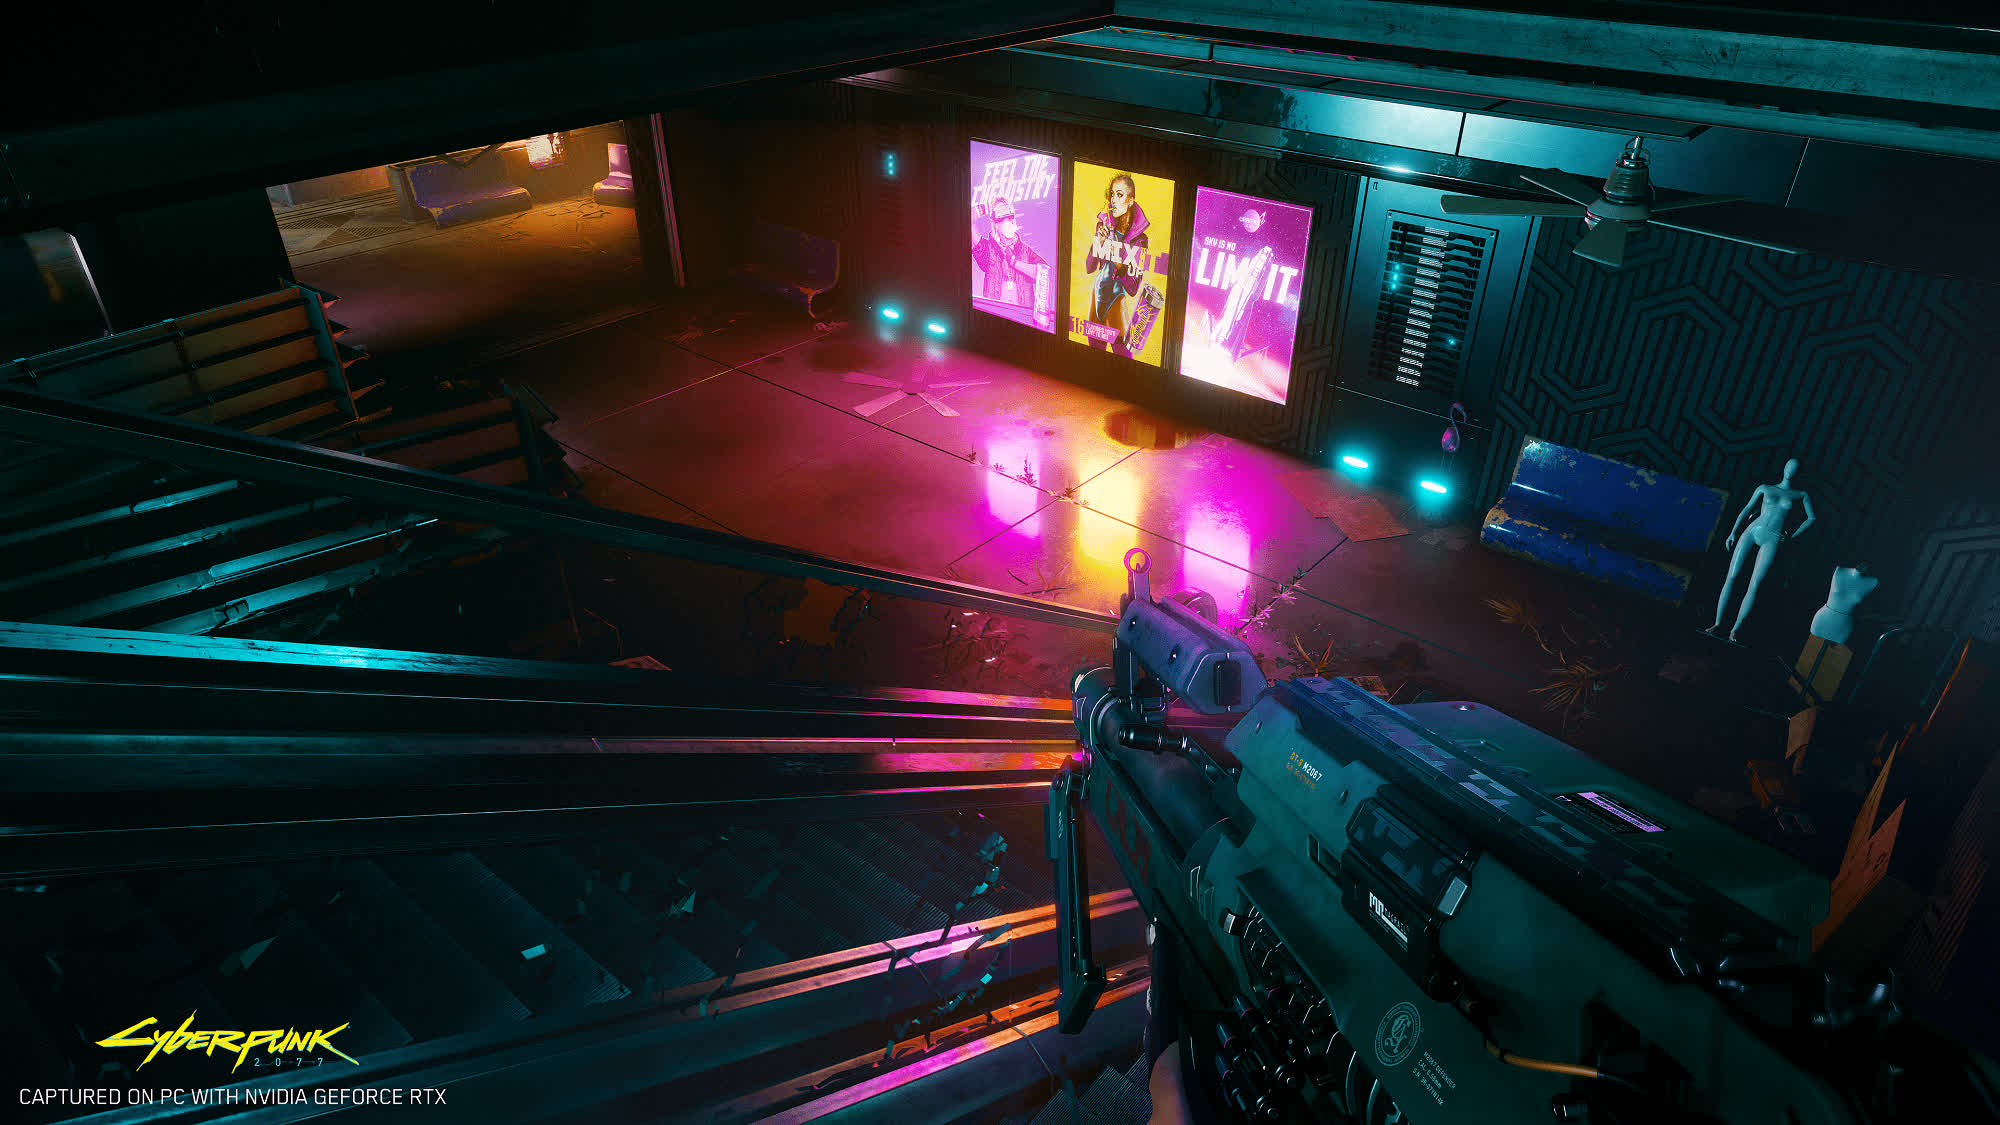 We might see 4K/ray tracing PC specs for Cyberpunk 2077